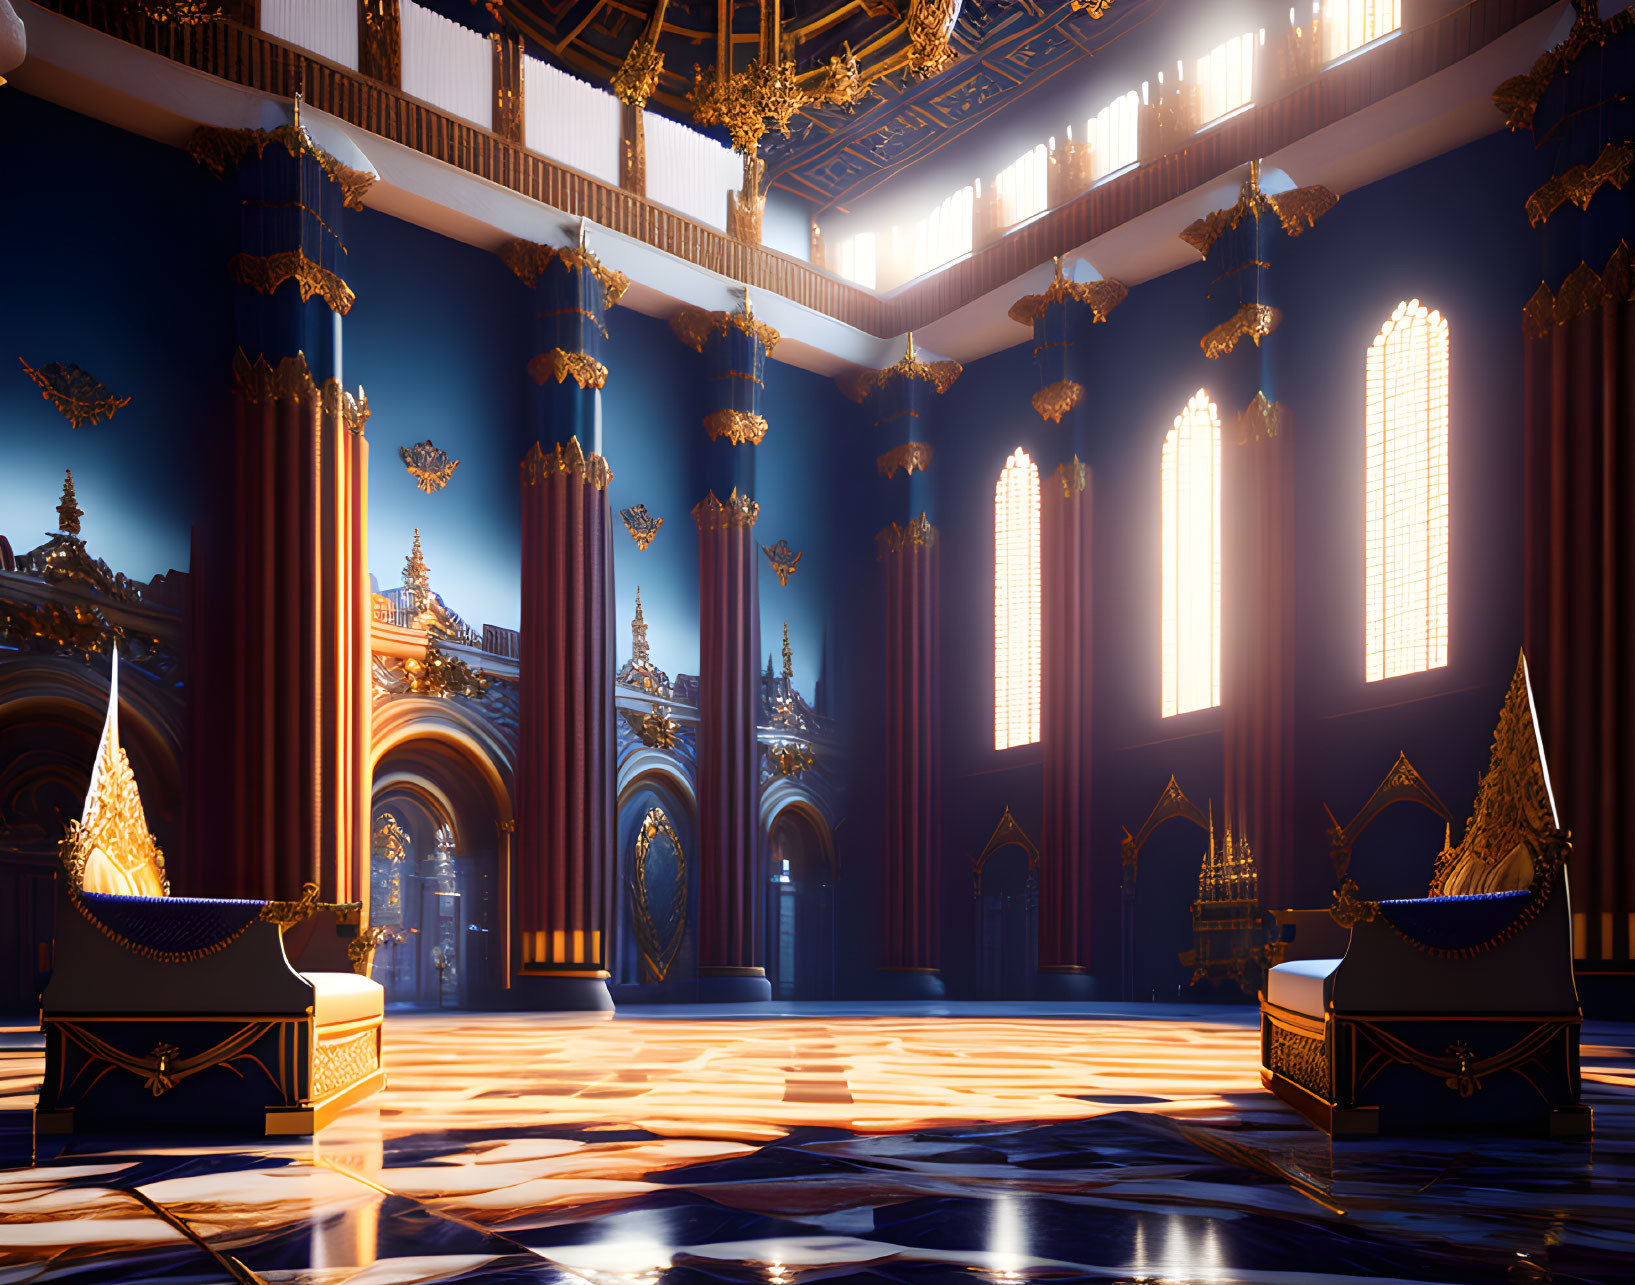 Luxurious Hall with High Ceilings, Gold Details, Tall Windows, and Grand Thrones on Blue